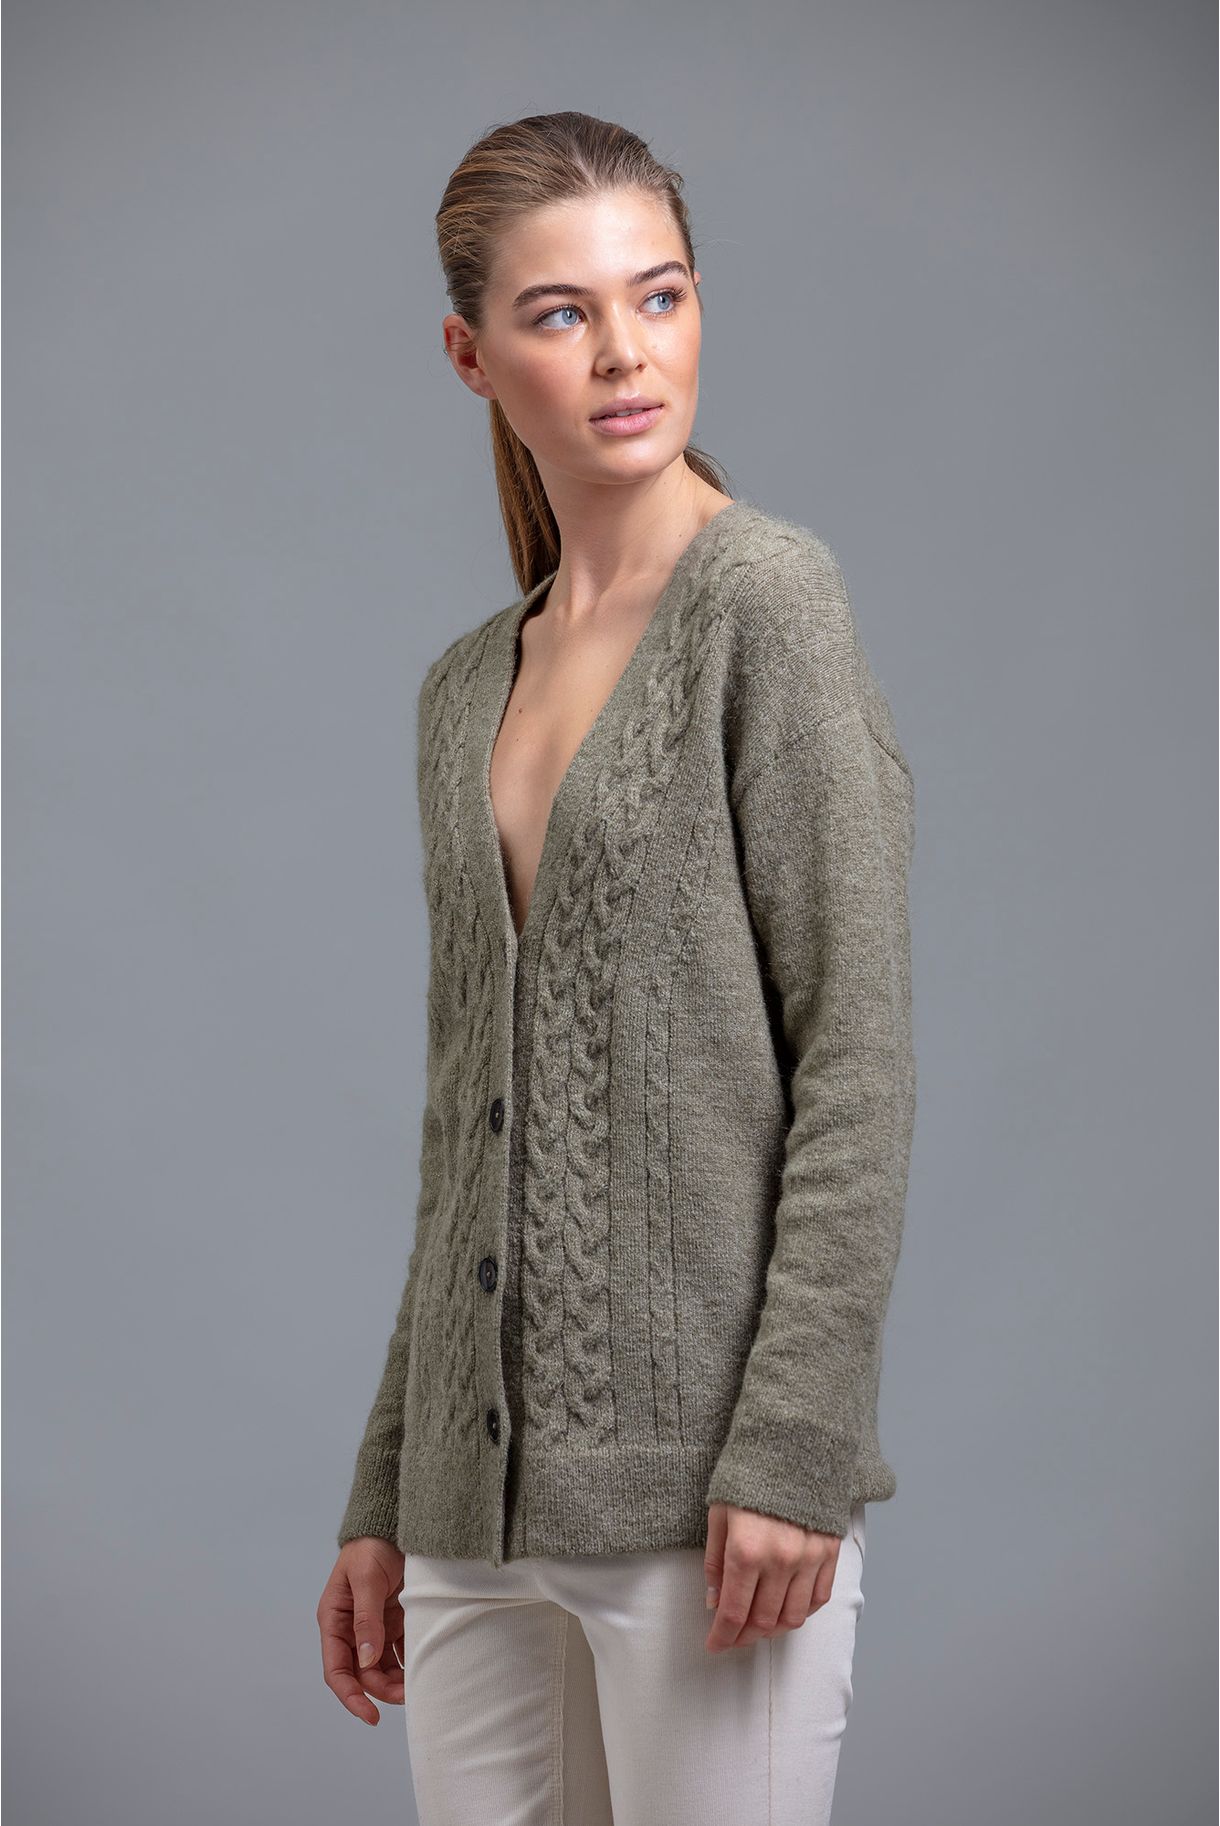 Wool braided effect knitted jacket